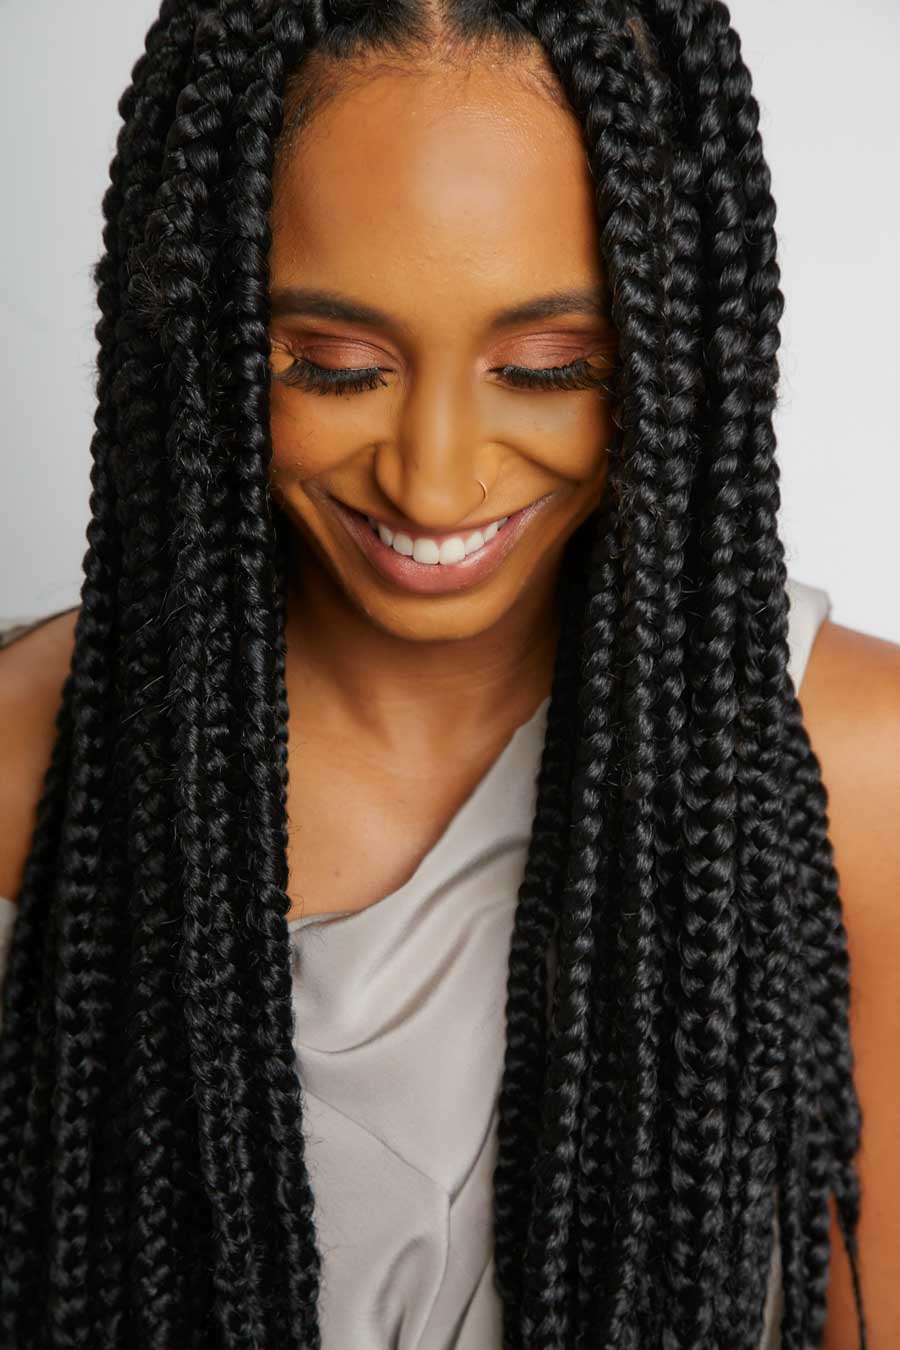 21 Endearing Jumbo Box Braids To Look Amazing Haircuts And Hairstyles 2021 Images And Photos 